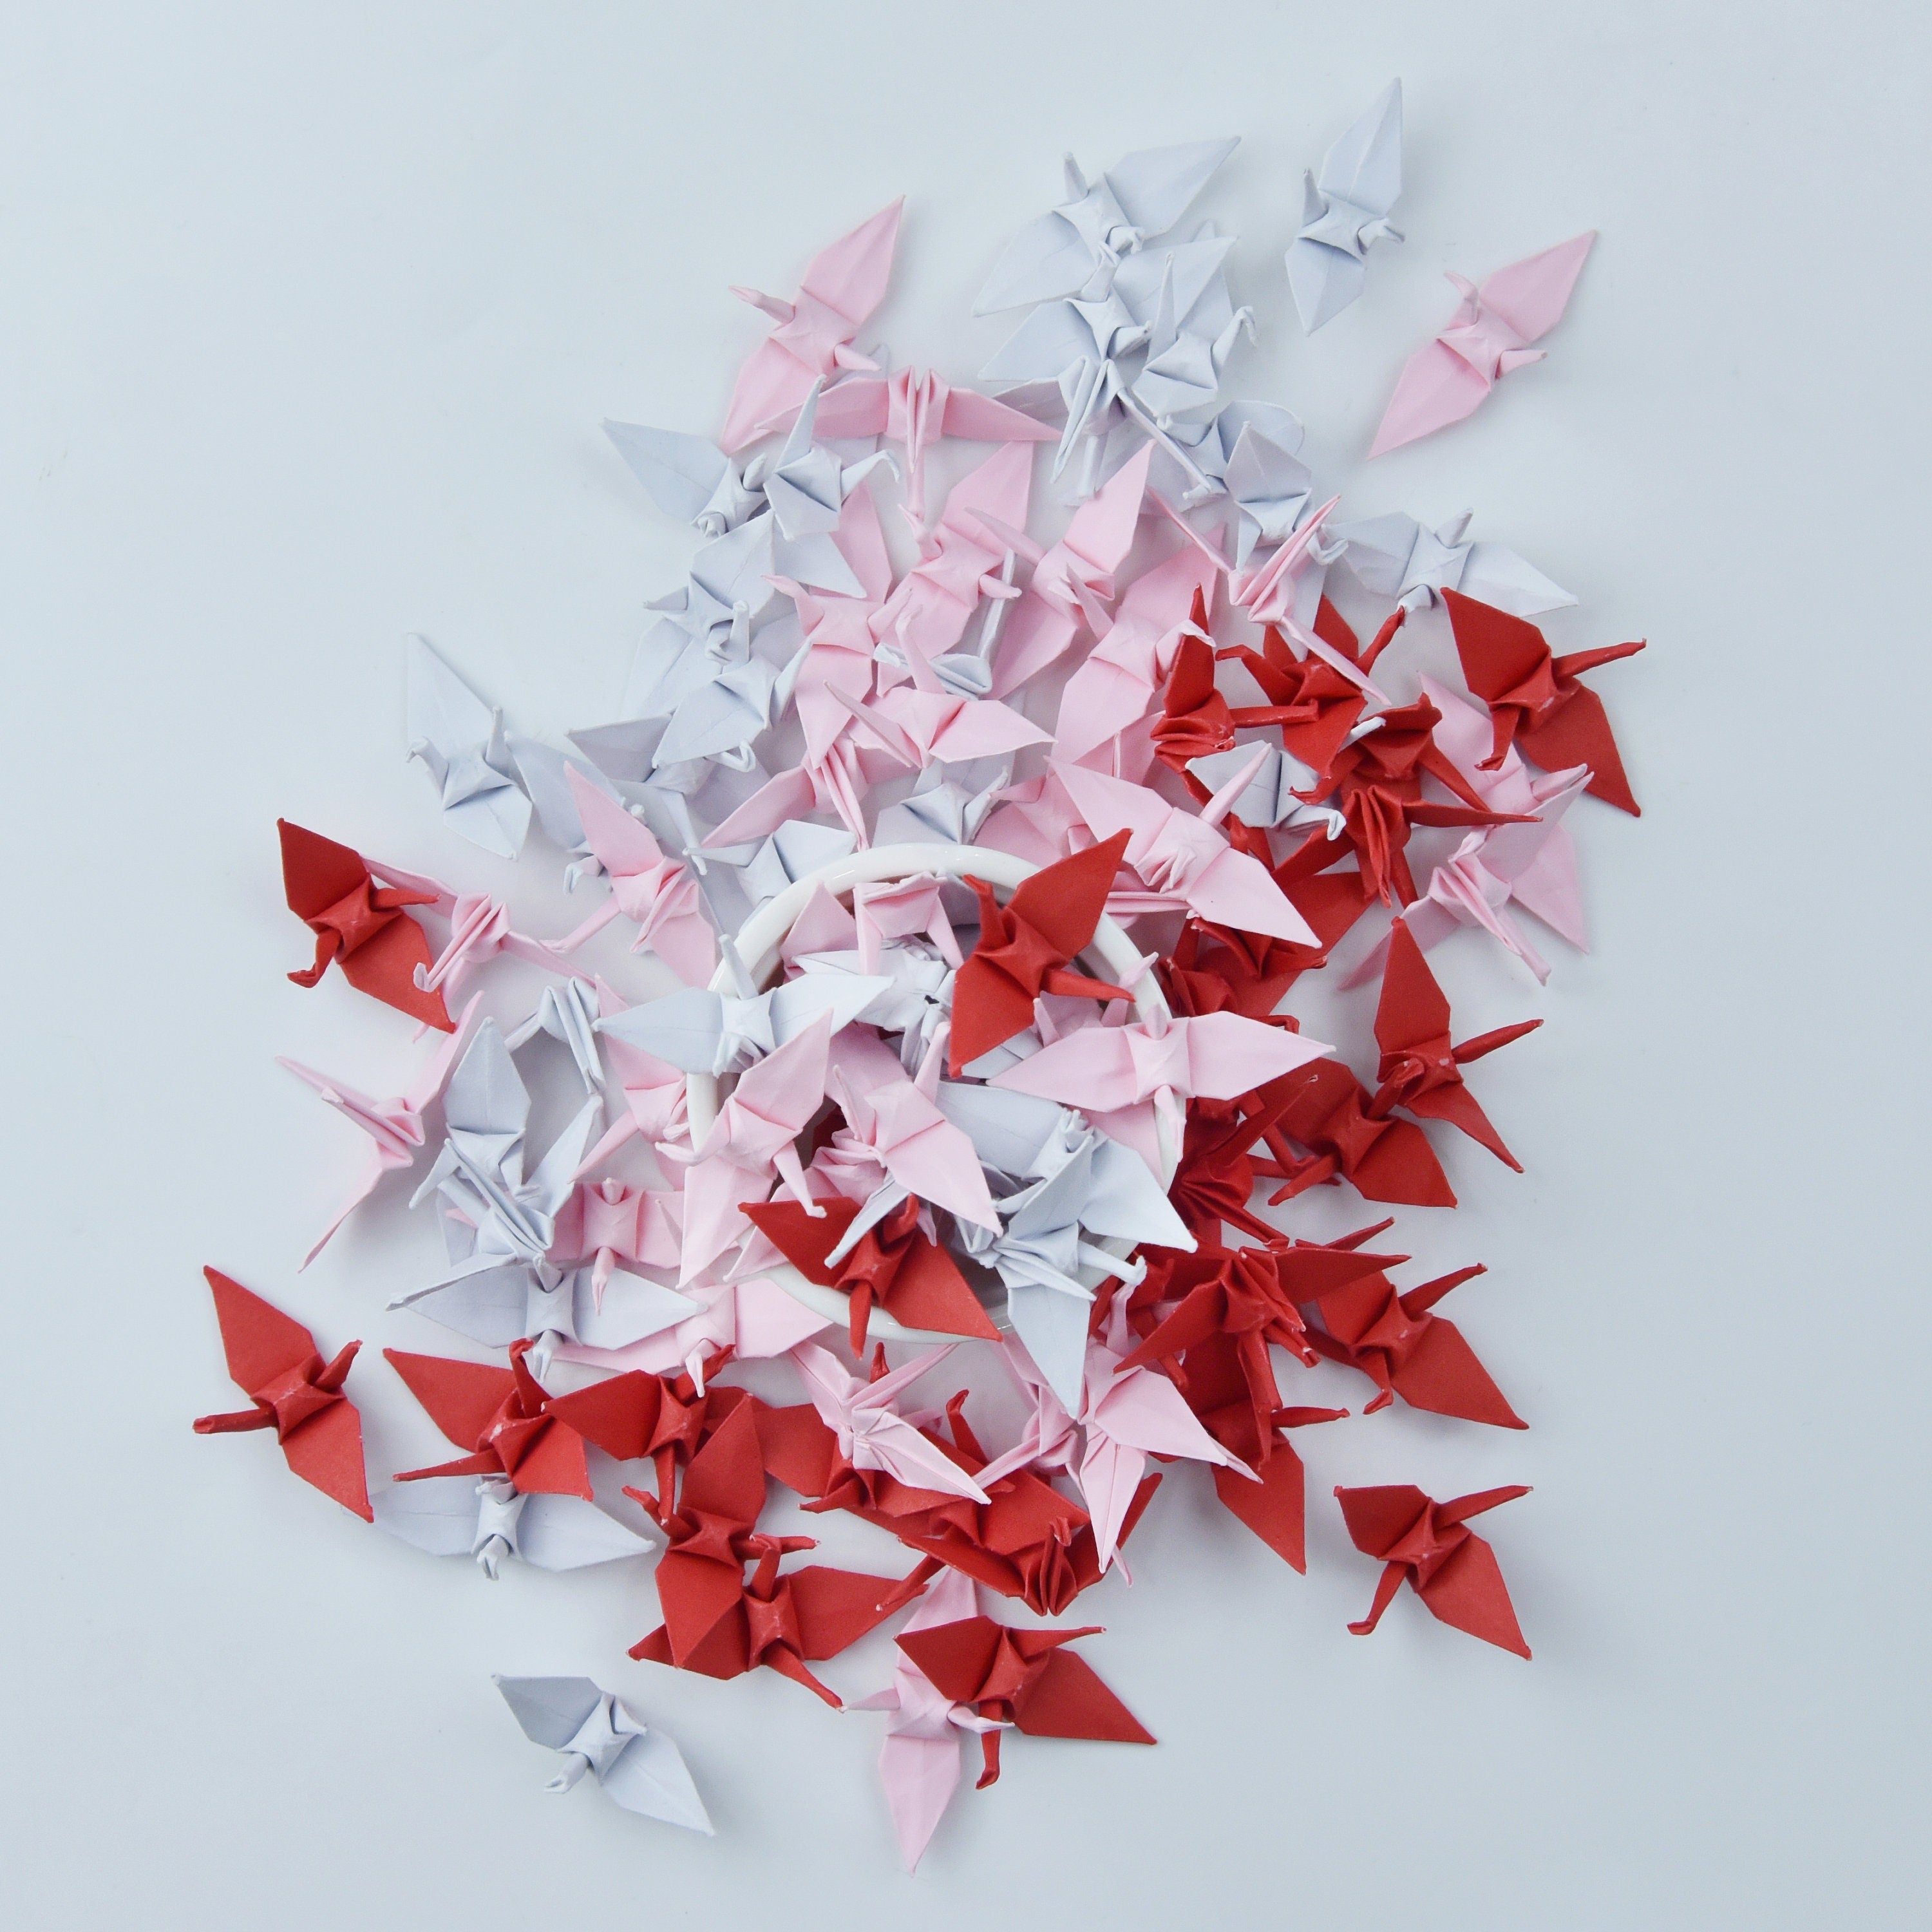 100 Origami Paper Crane Red Pink White Shade Tone Small 3.81 cm (1.5 inches) Origami crane for Wedding Party, Valentine's Gift